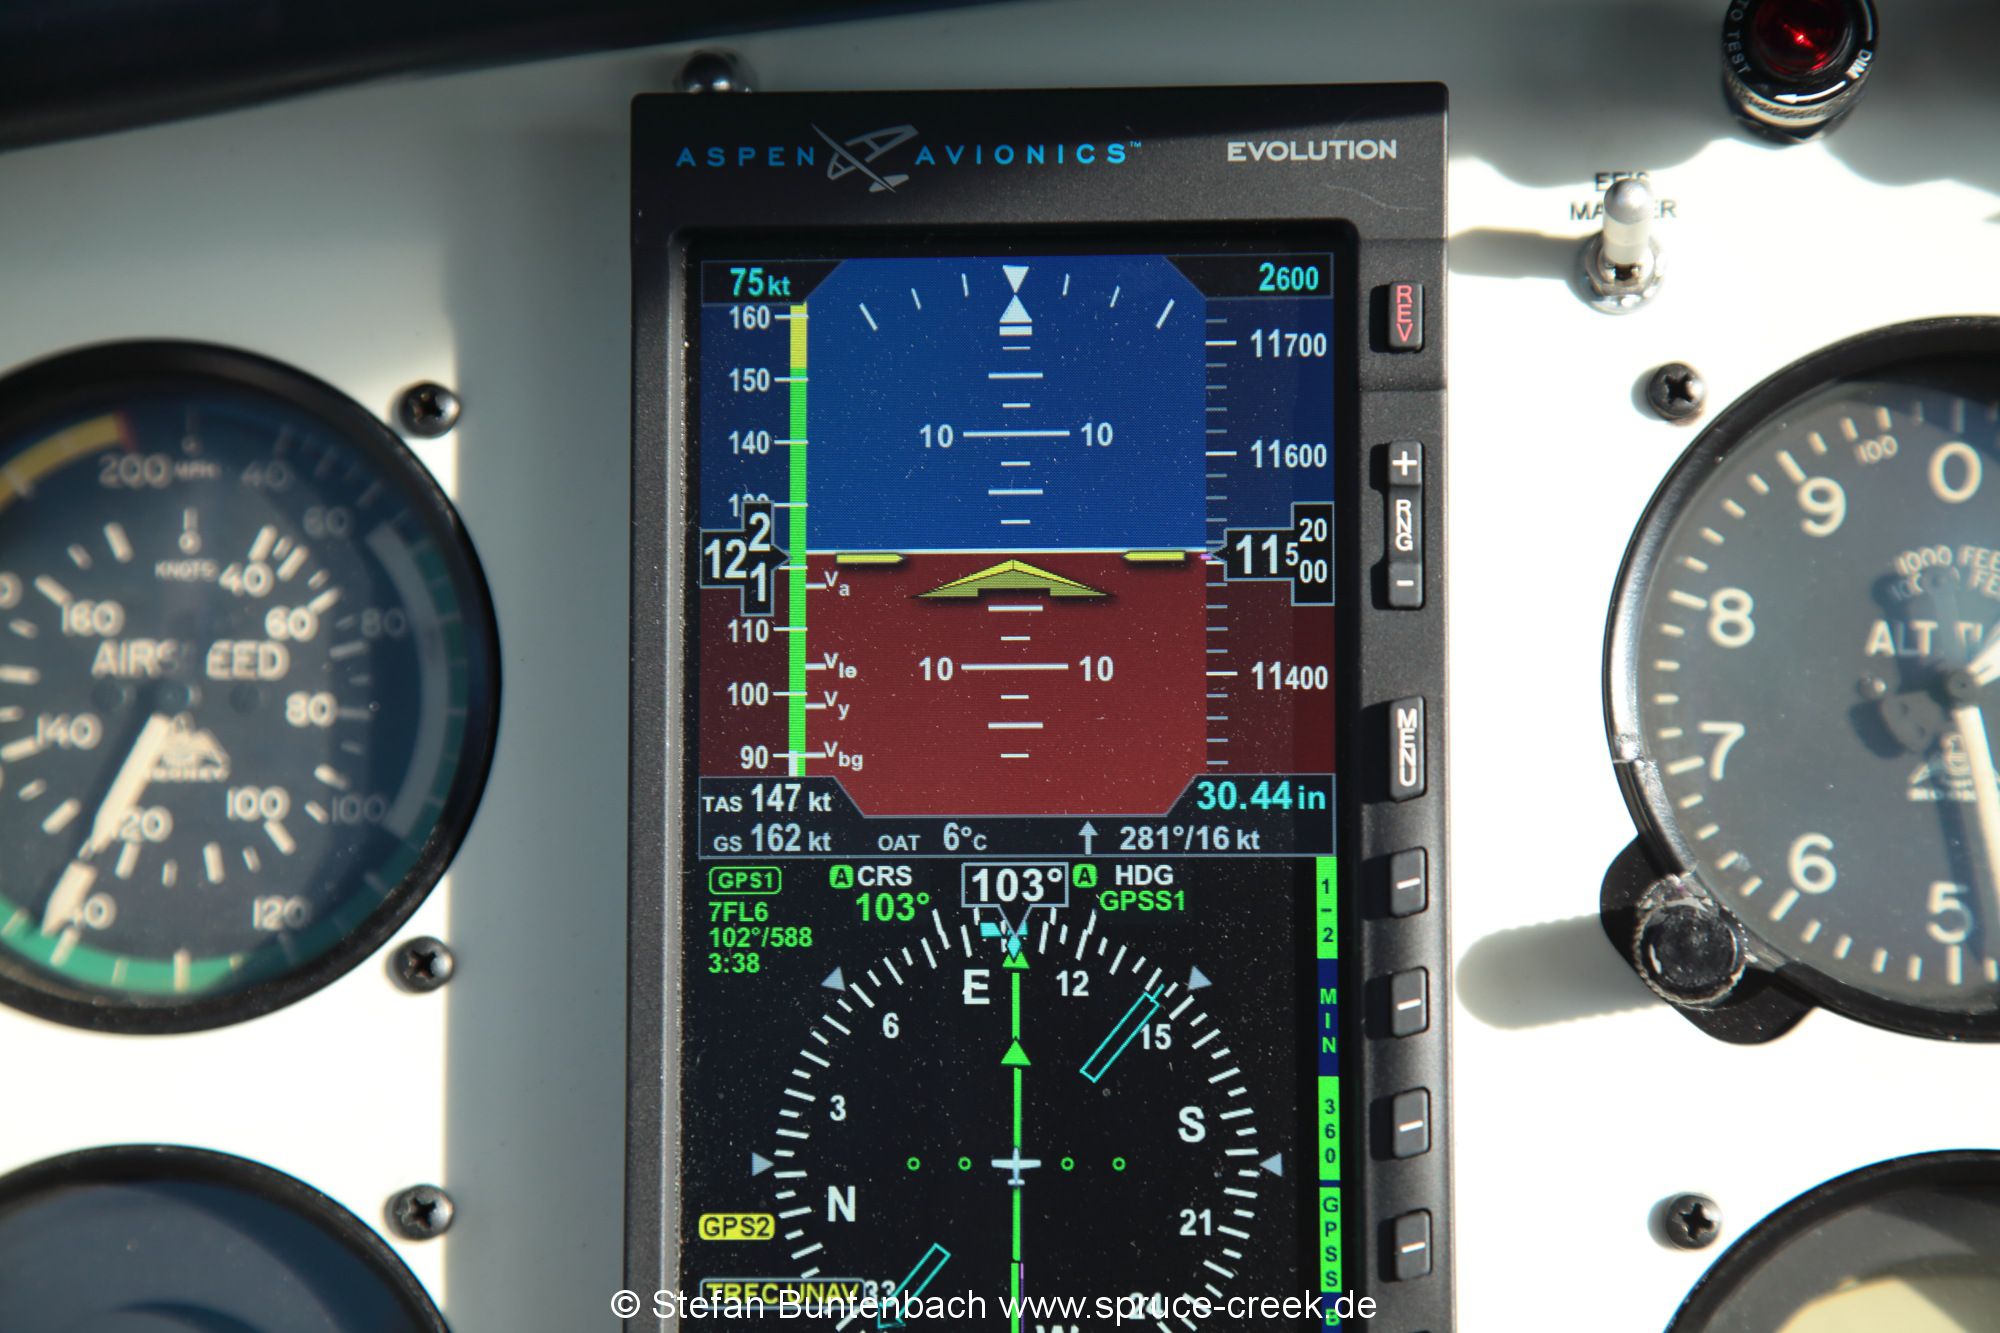 147 KTS True Airspeed (TAS) in 11500 feet displayed on the Aspen 1000 Pro PFD shwos that the Mooney M20 F N6377Q is a good airplane for long distance travel. --- Mooney M20F IMG_1101